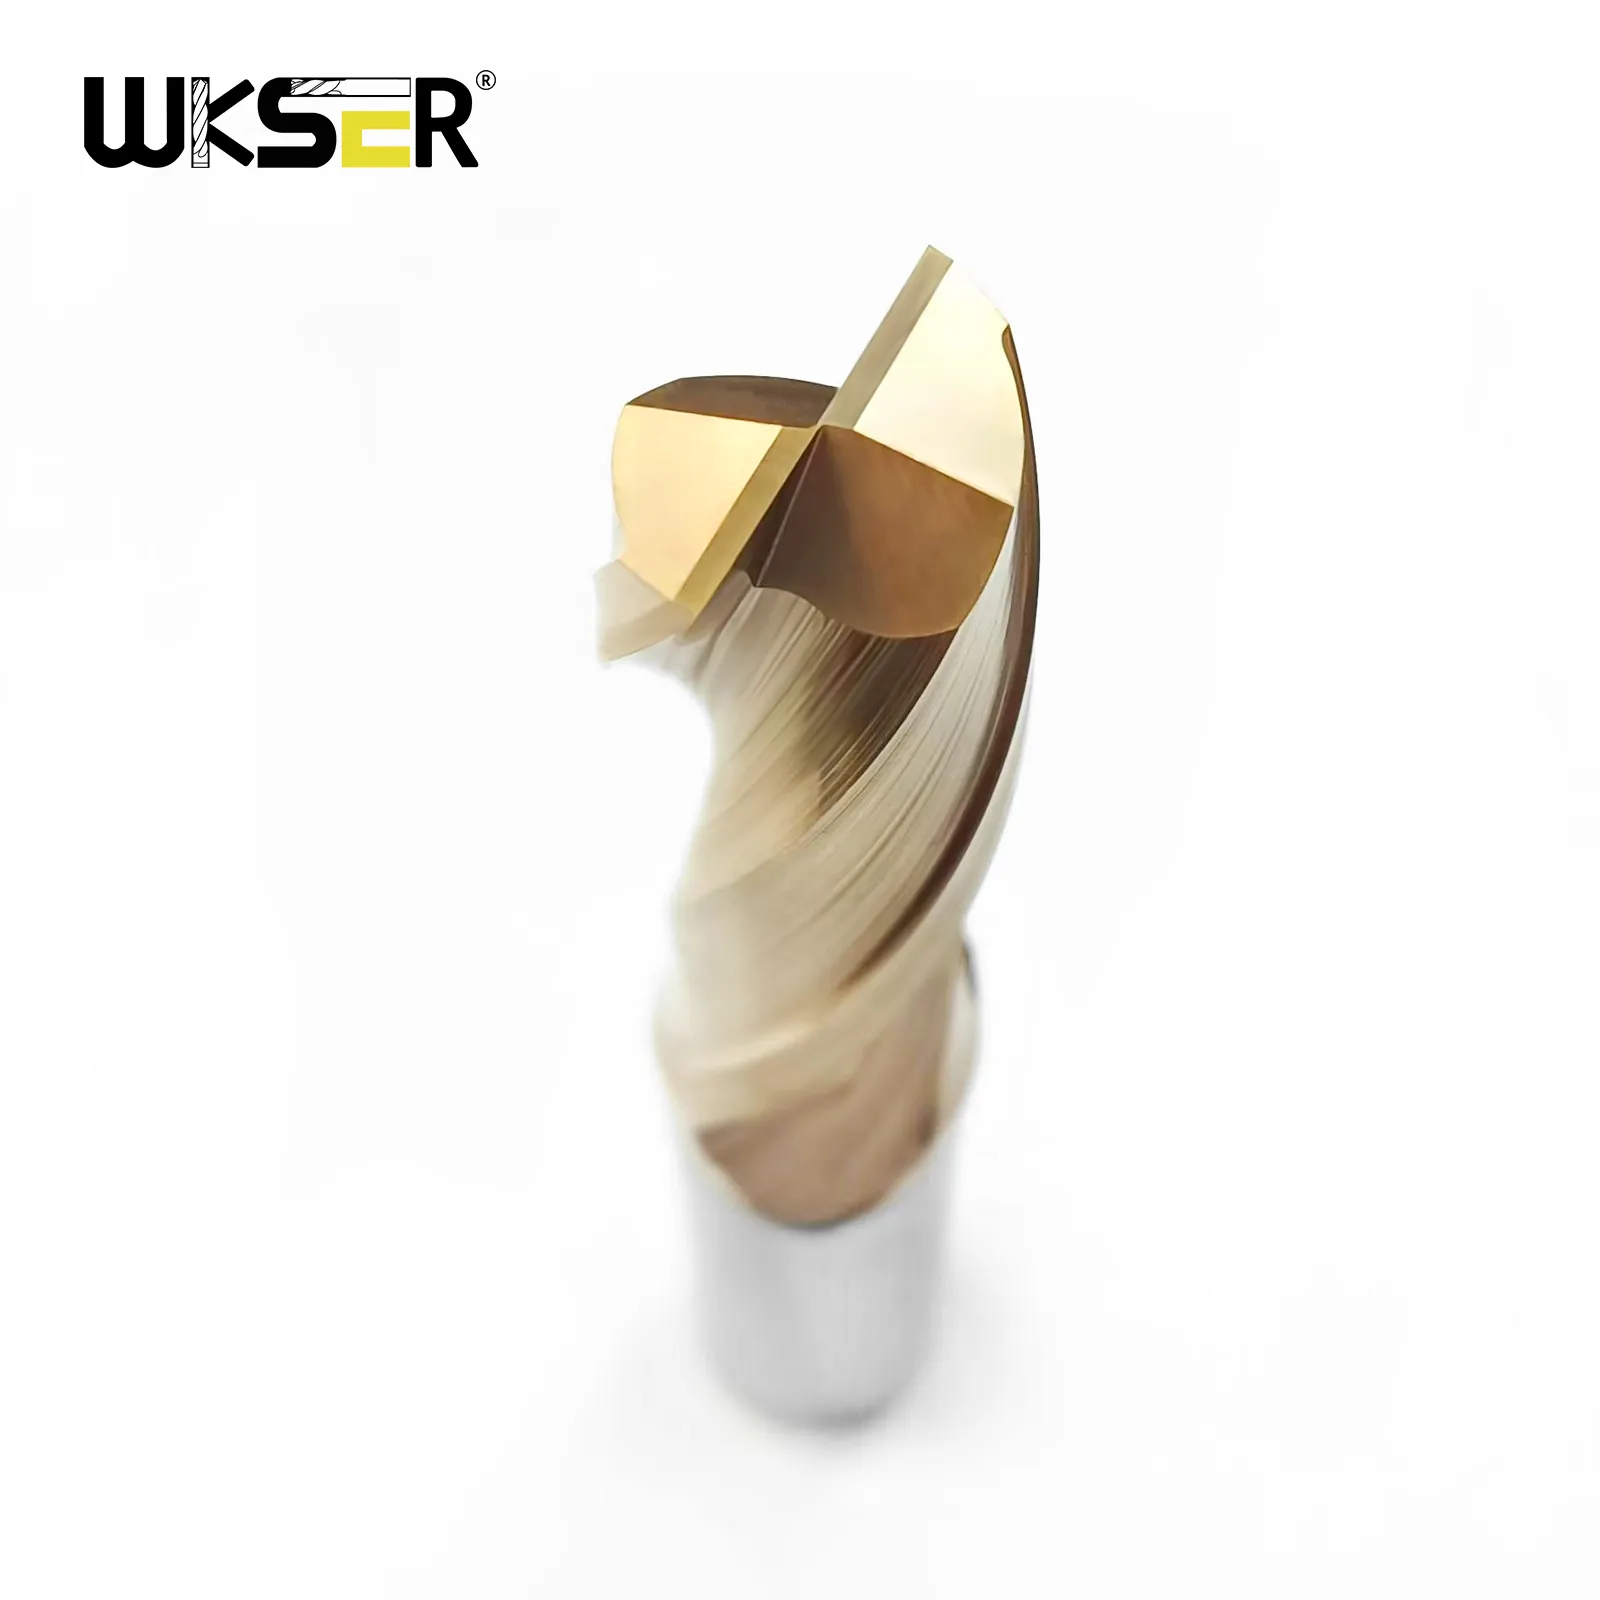 Customize carbide Milling Cutter Golden Coating 2 Flute end mill CNC Cutting Tools